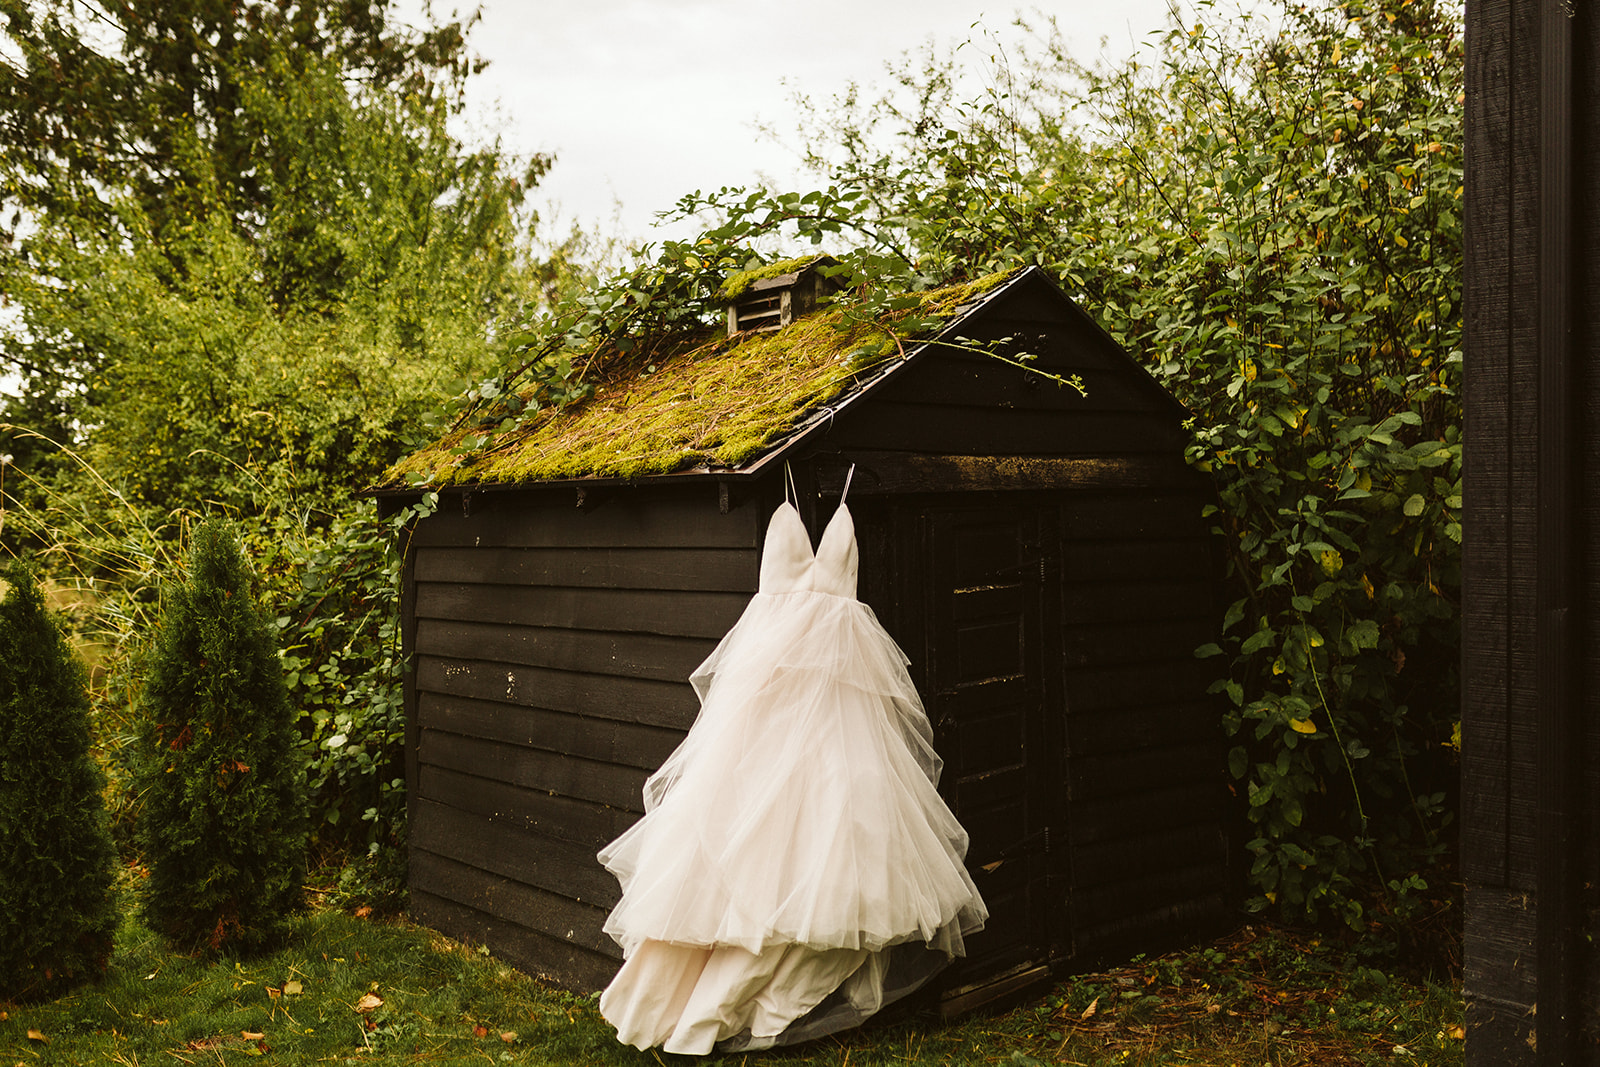 A white ballgown hangs on the side of an old shed in the woods.